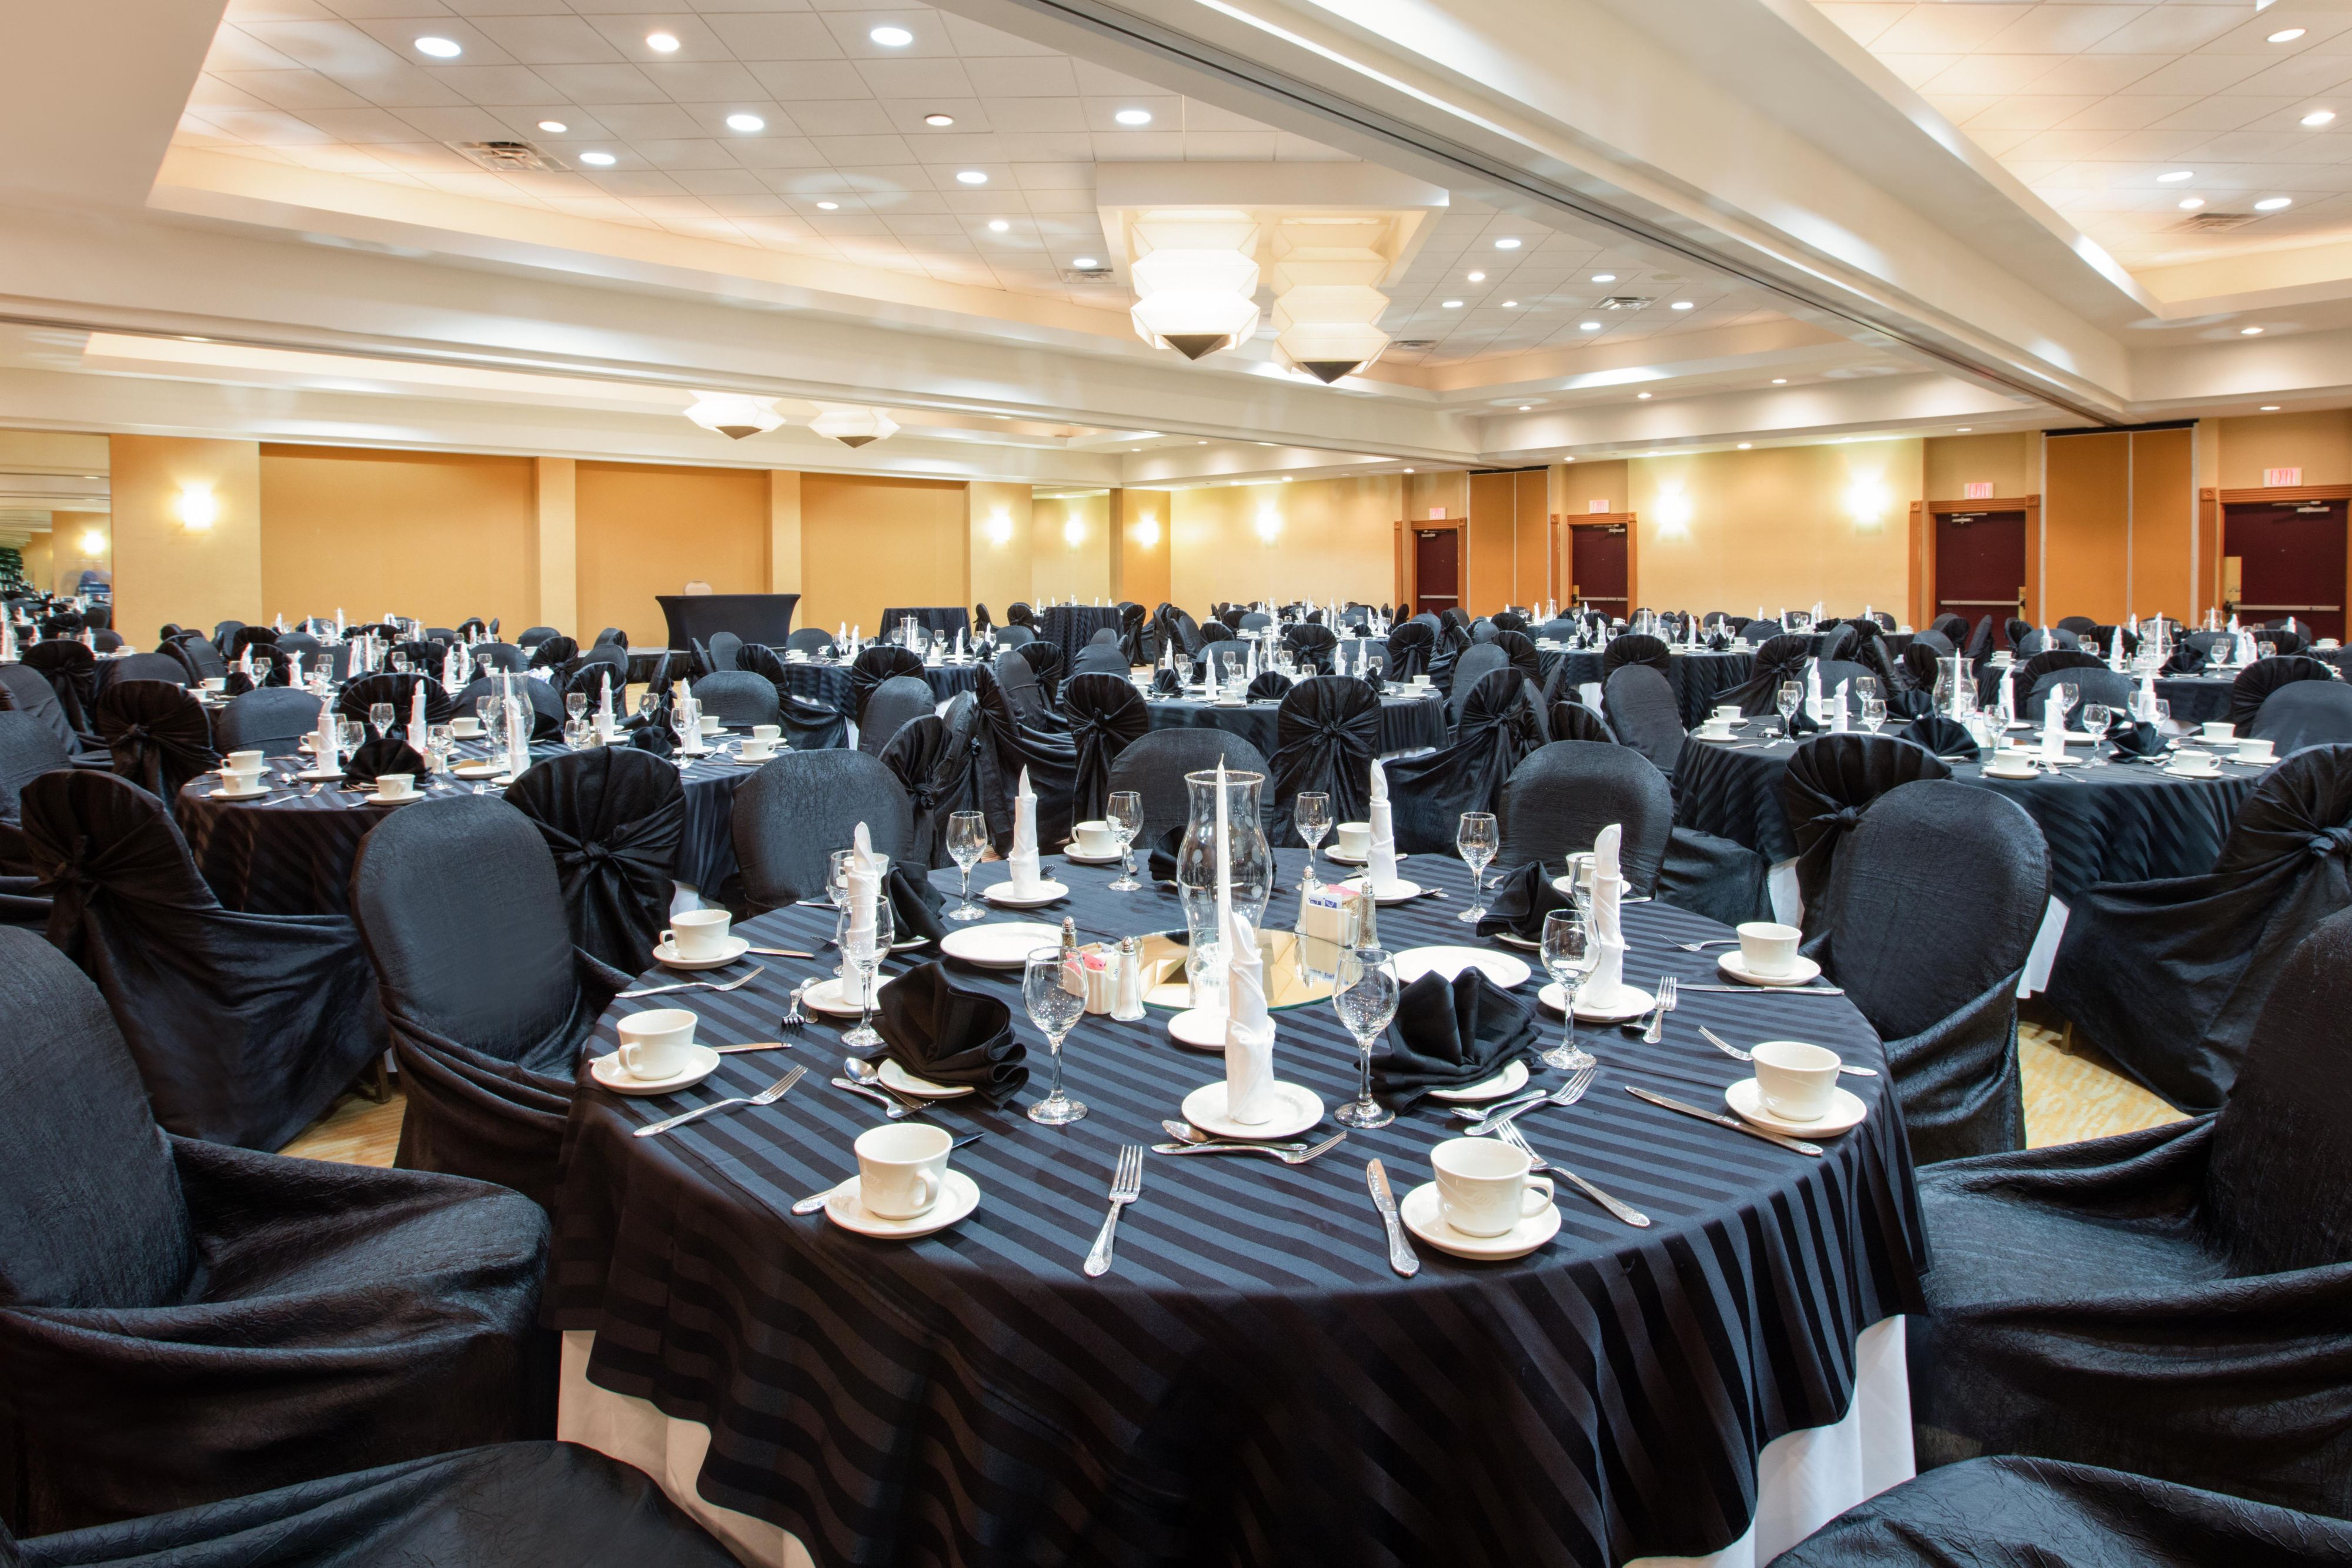 The Windsor Ballroom is perfect for large events and banquets.